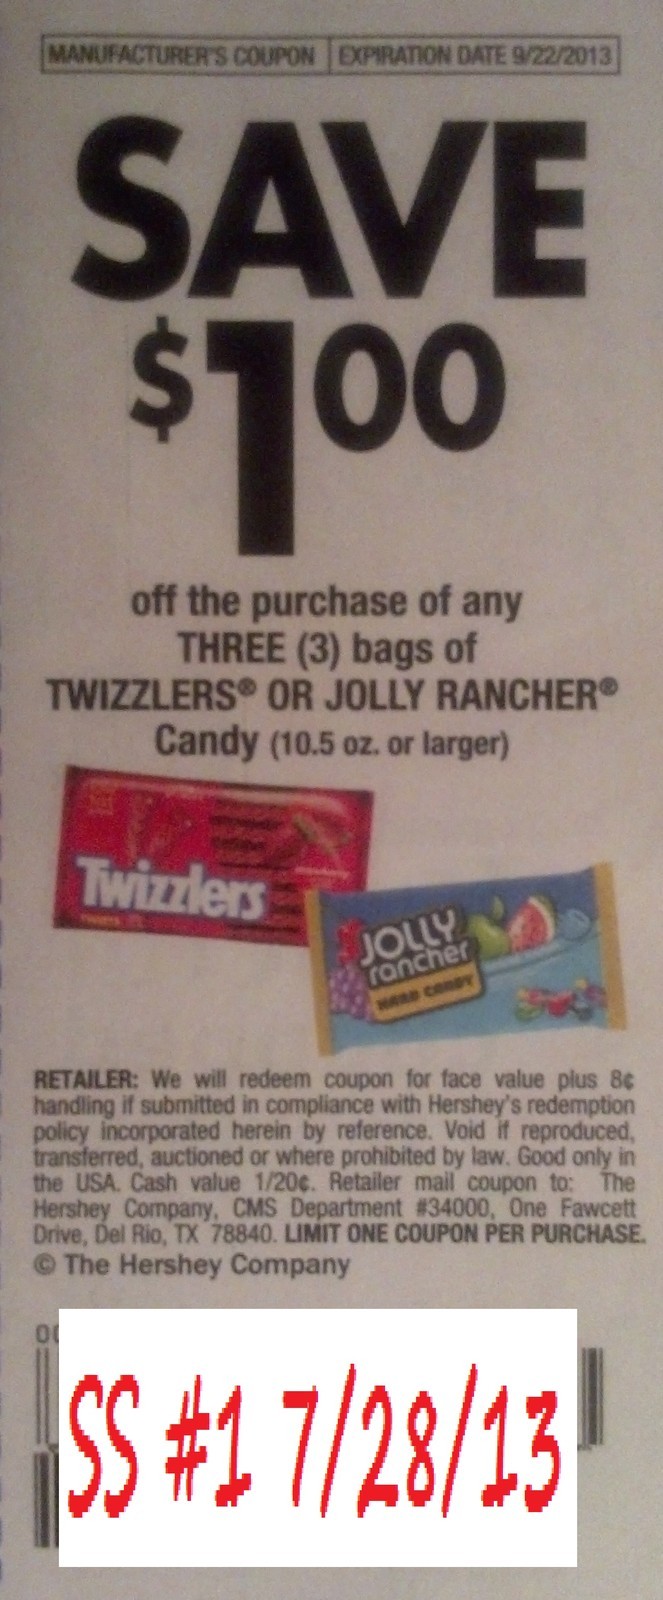 Save $1.00 off the purchase of any three (3) bags of Twizzlers or jolly rancher candy (10.5 oz or larger) Expires 09/22/2013